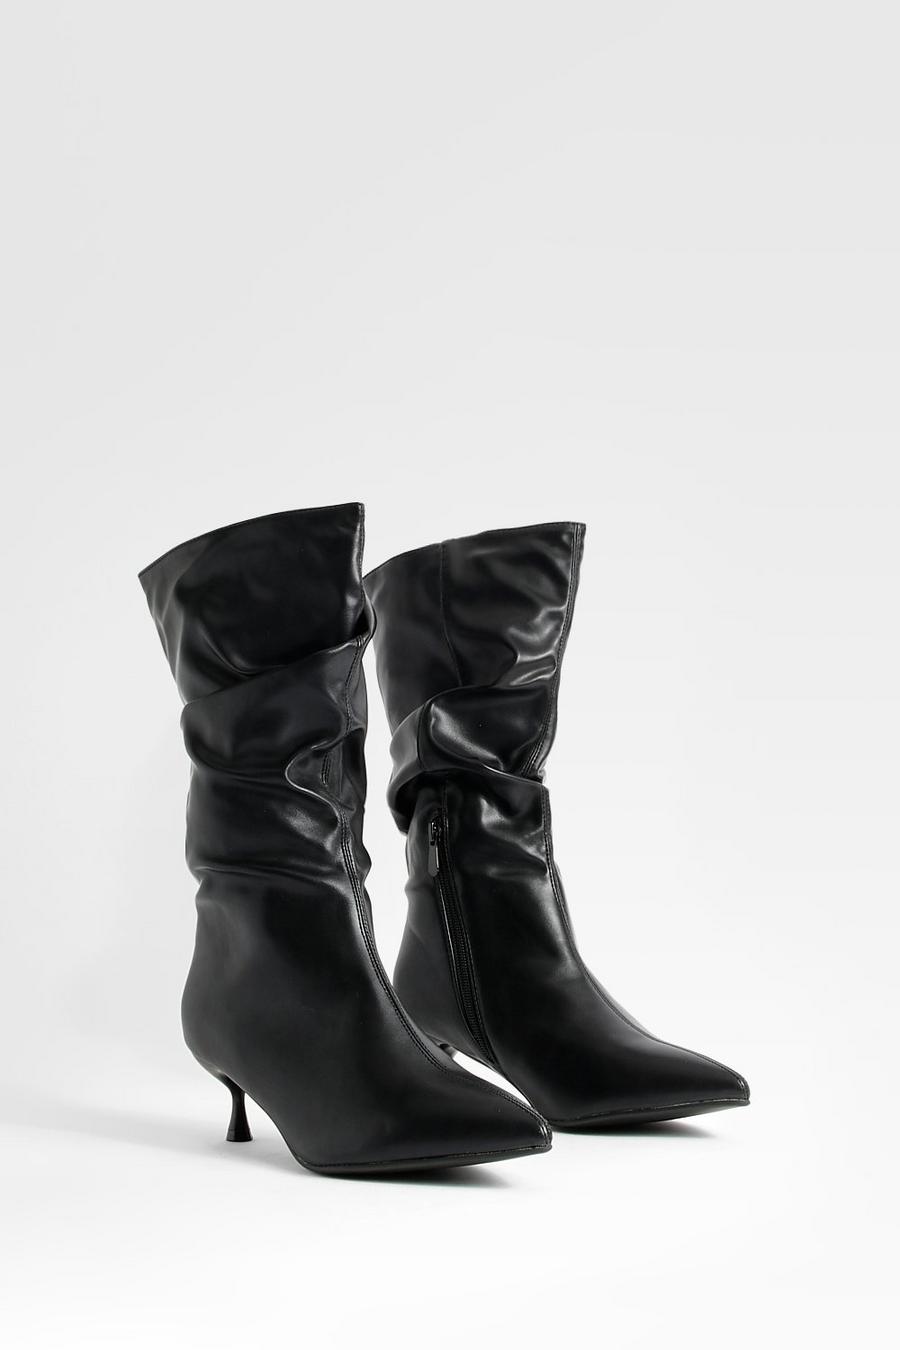 Black Wide Fit Ruched Low Heel Knee High Boots